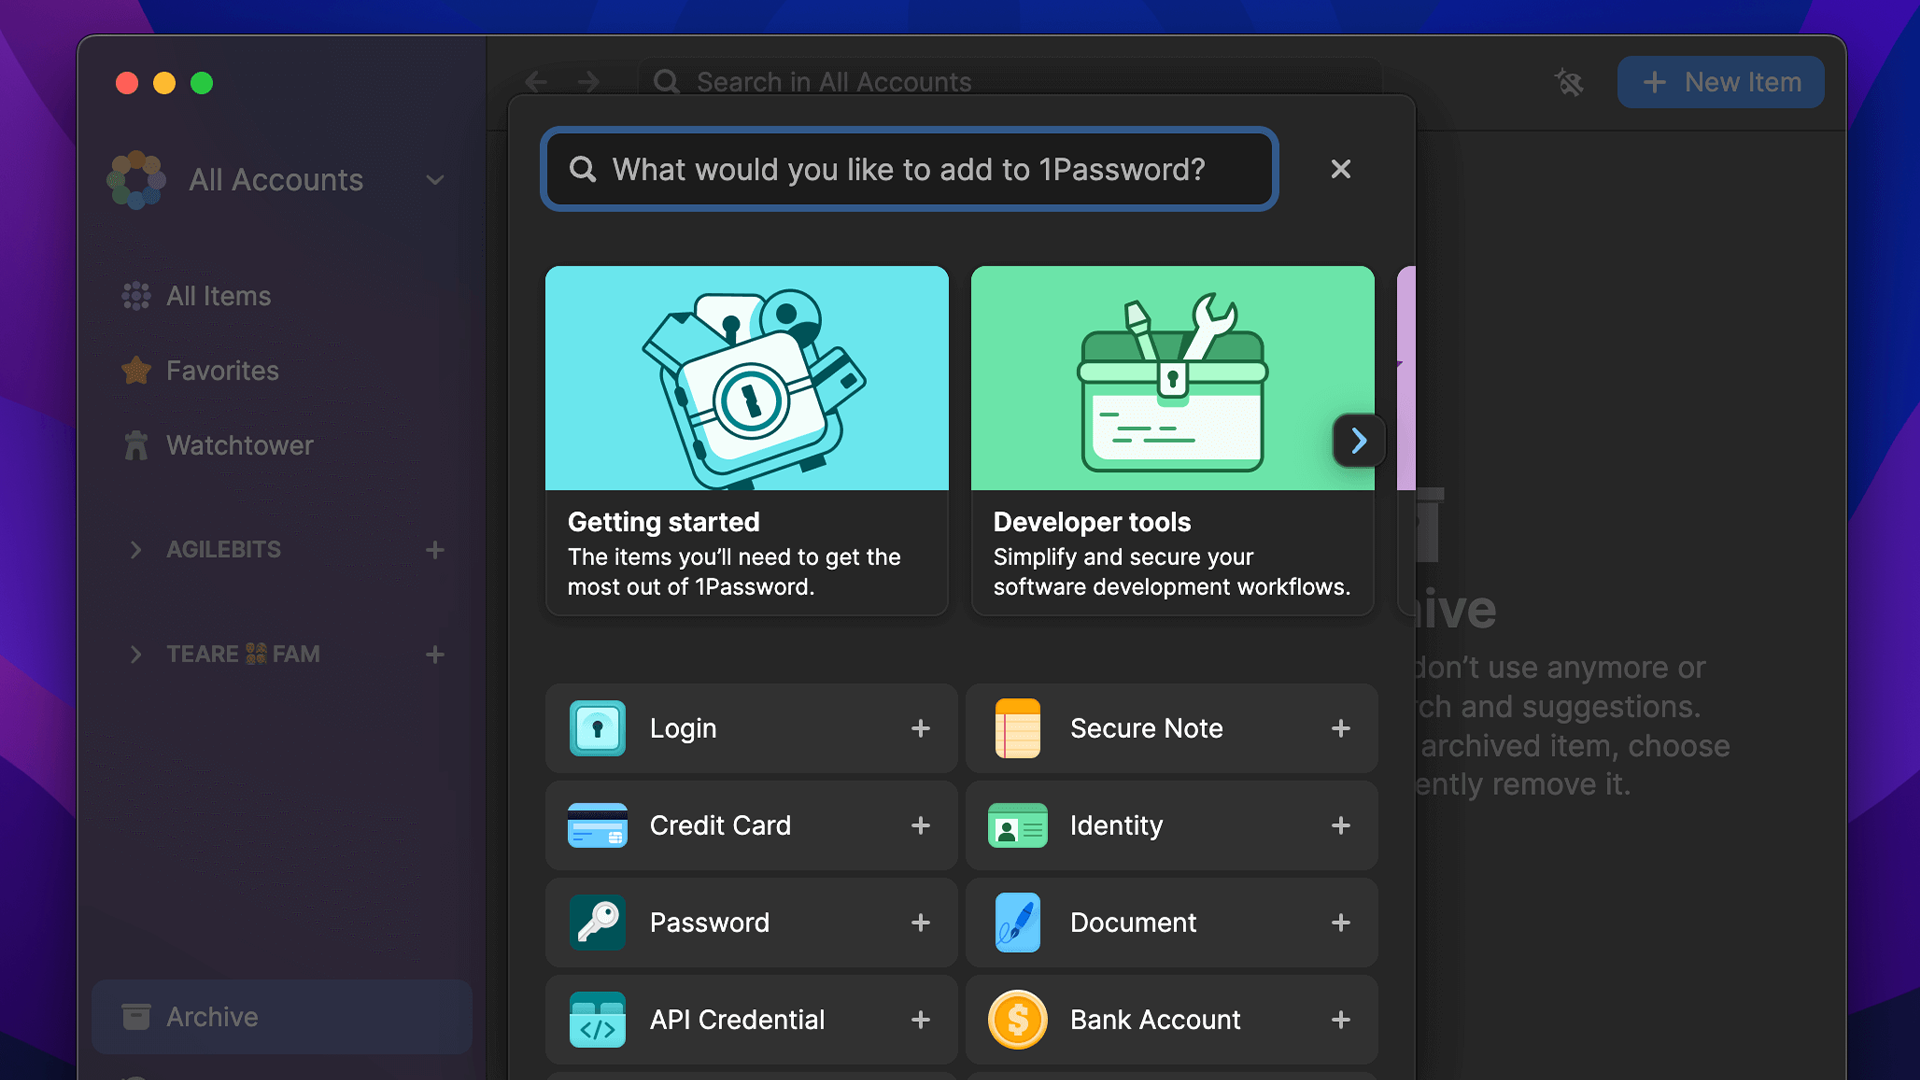 1Password 8's new Item Catalog, which moves you through setting up new passwords, credit cards, etc.